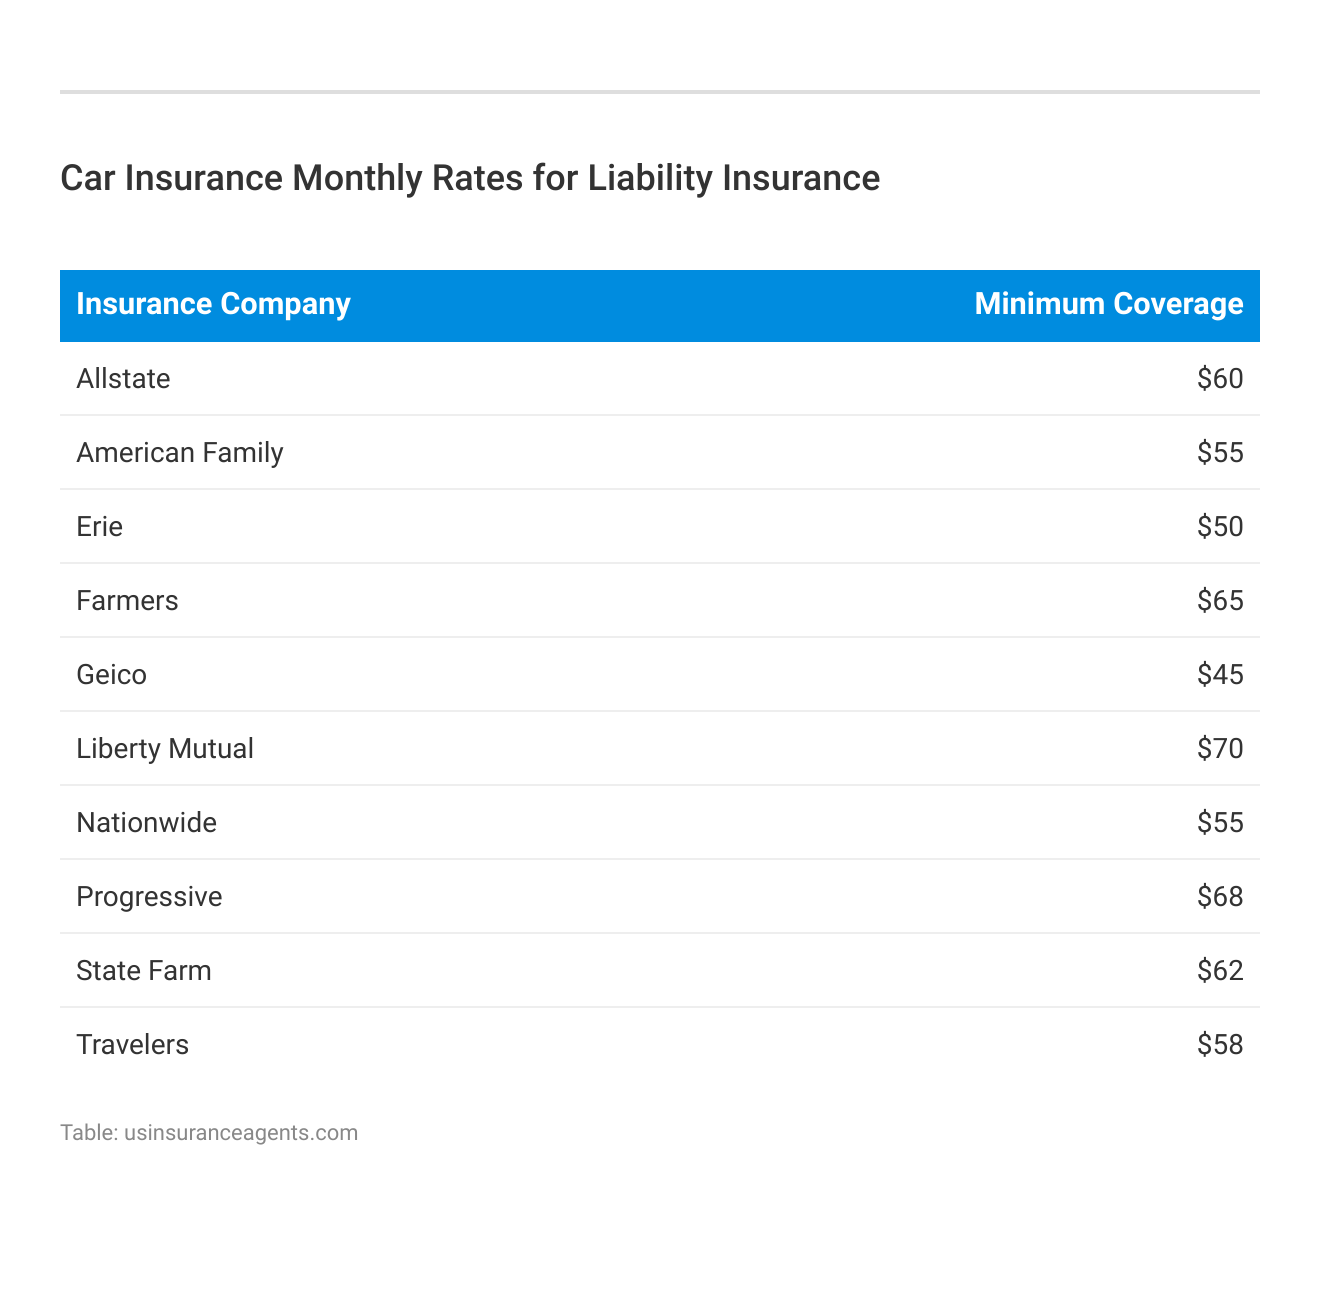 <h3>Car Insurance Monthly Rates for Liability Insurance</h3>